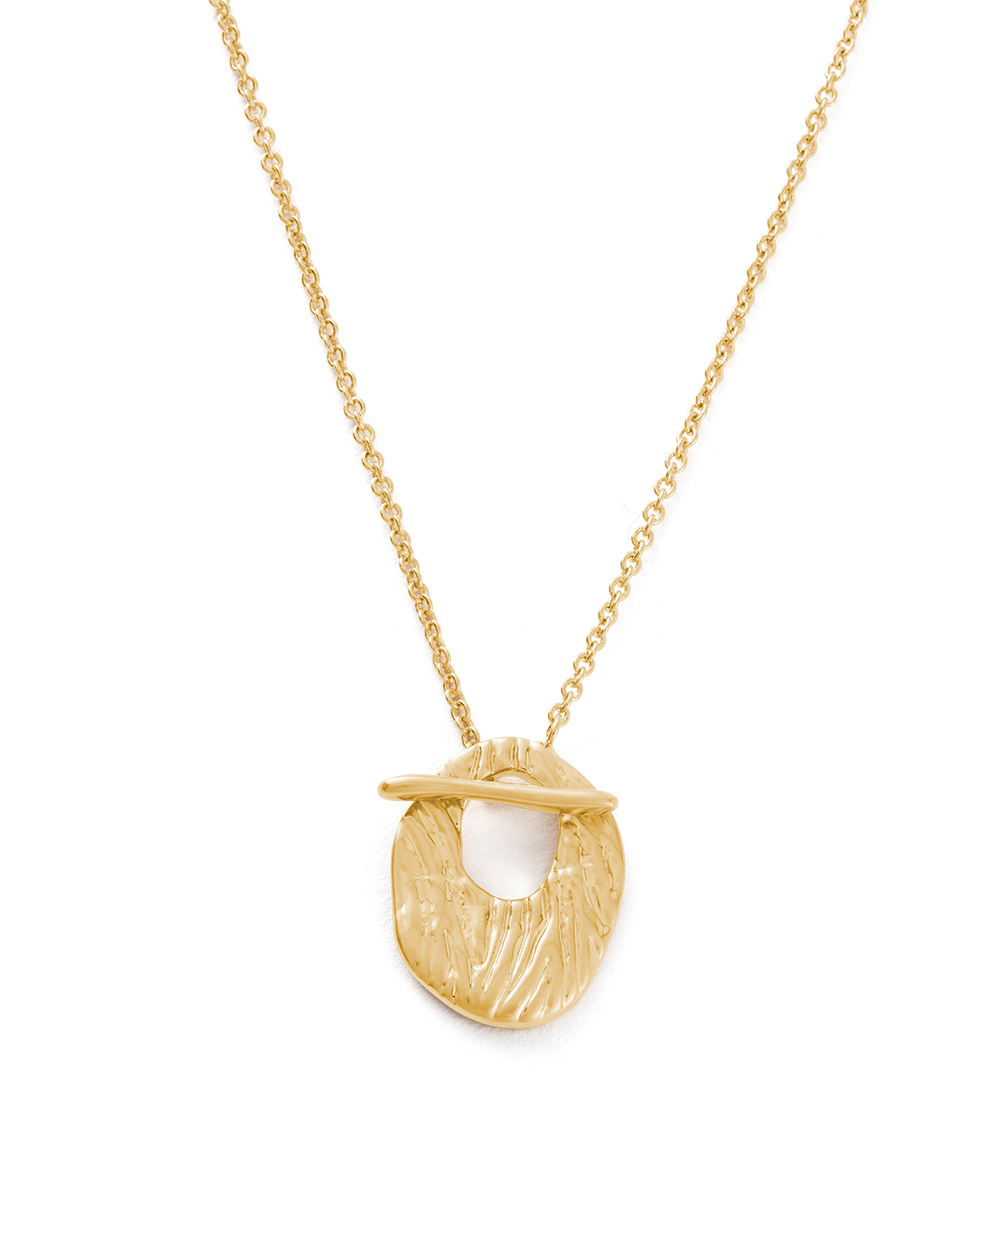 KIRSTIN ASH - REFLECTION NECKLACE GOLD